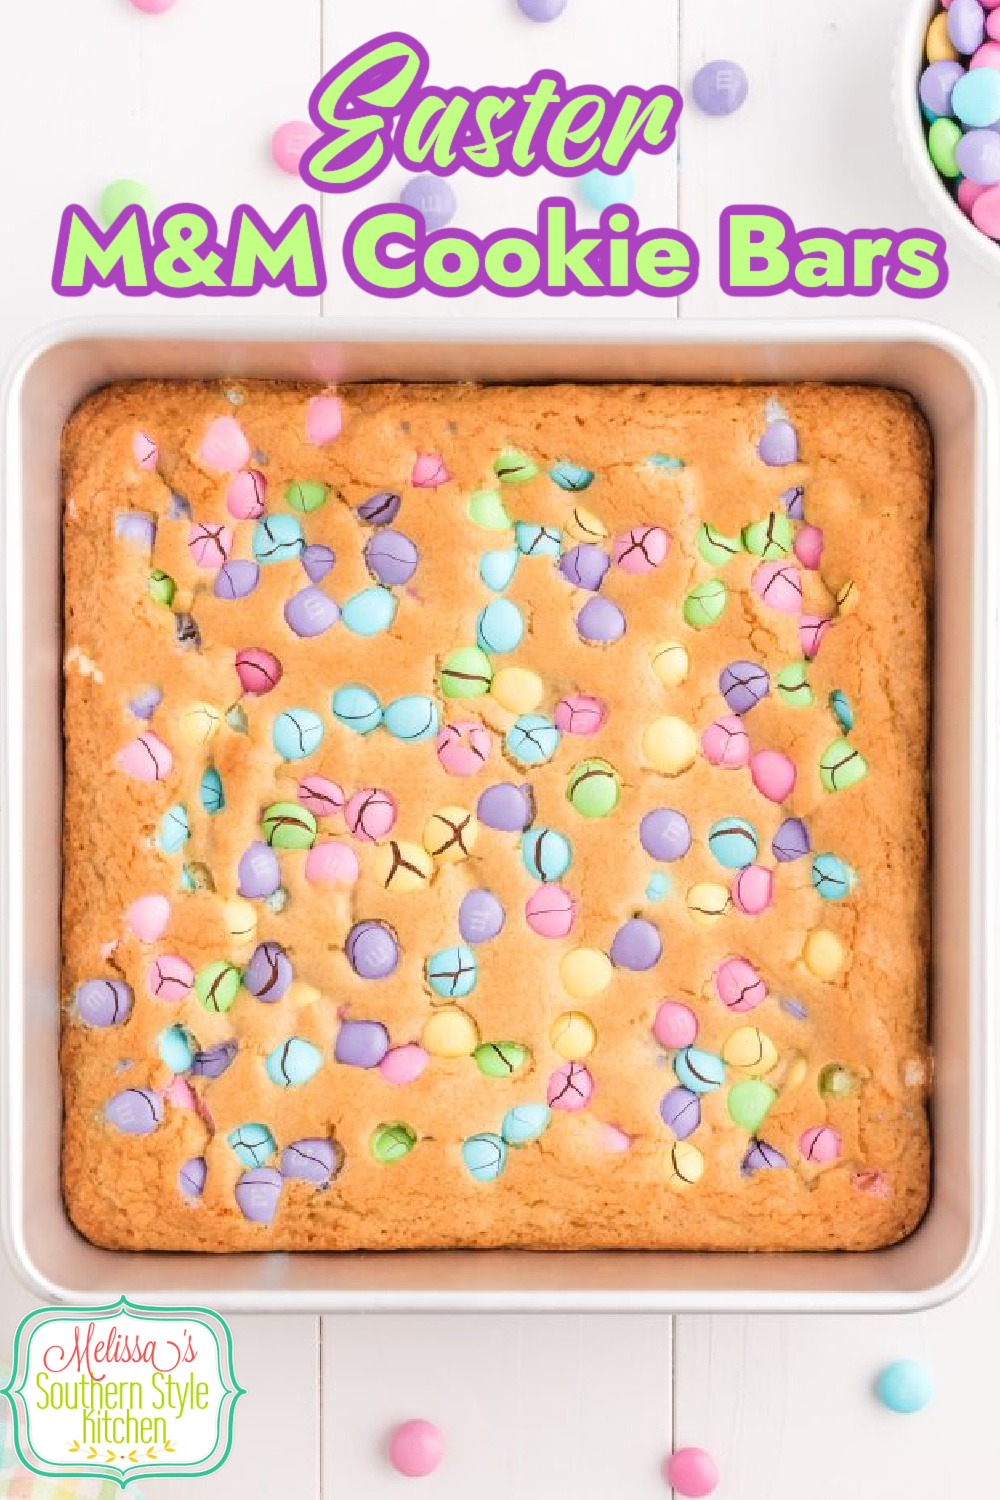 These colorful Easter M&M Cookie Bars are perfect for any spring celebration #cookiebars #easterdesserts #eastercookiebars #m&m #m&mcookies #cookierecipes #easterrecipes #easterblondies